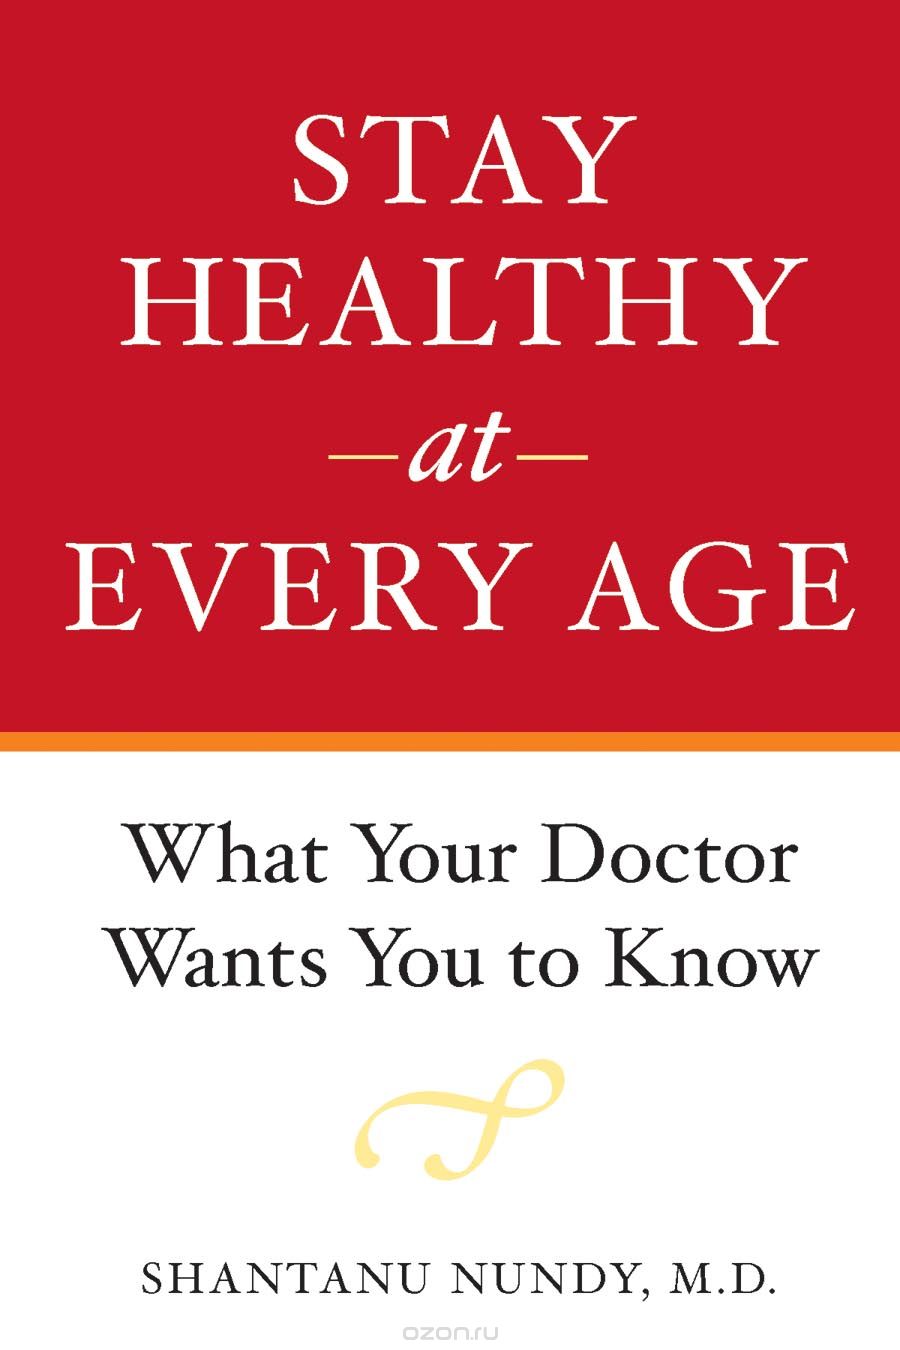 Скачать книгу "Stay Healthy at Every Age – What Your Doctor Wants You to Know"